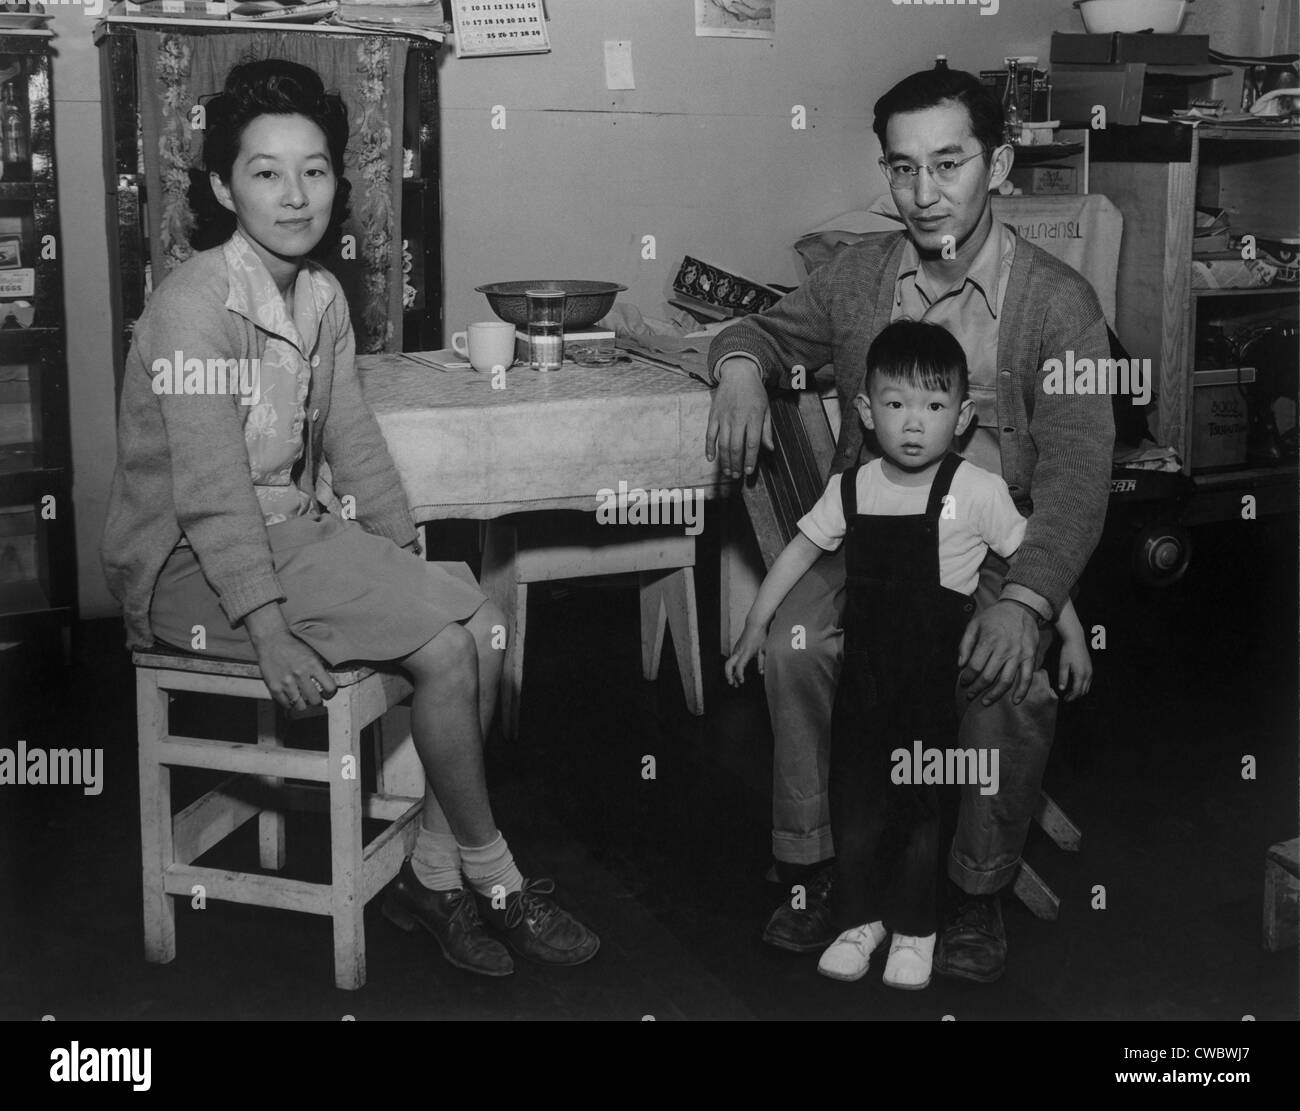 Japanese American family interned at Manzanar Relocation Center during World War II. Mr. and Mrs. Henry J. Tsurutani pose in Stock Photo